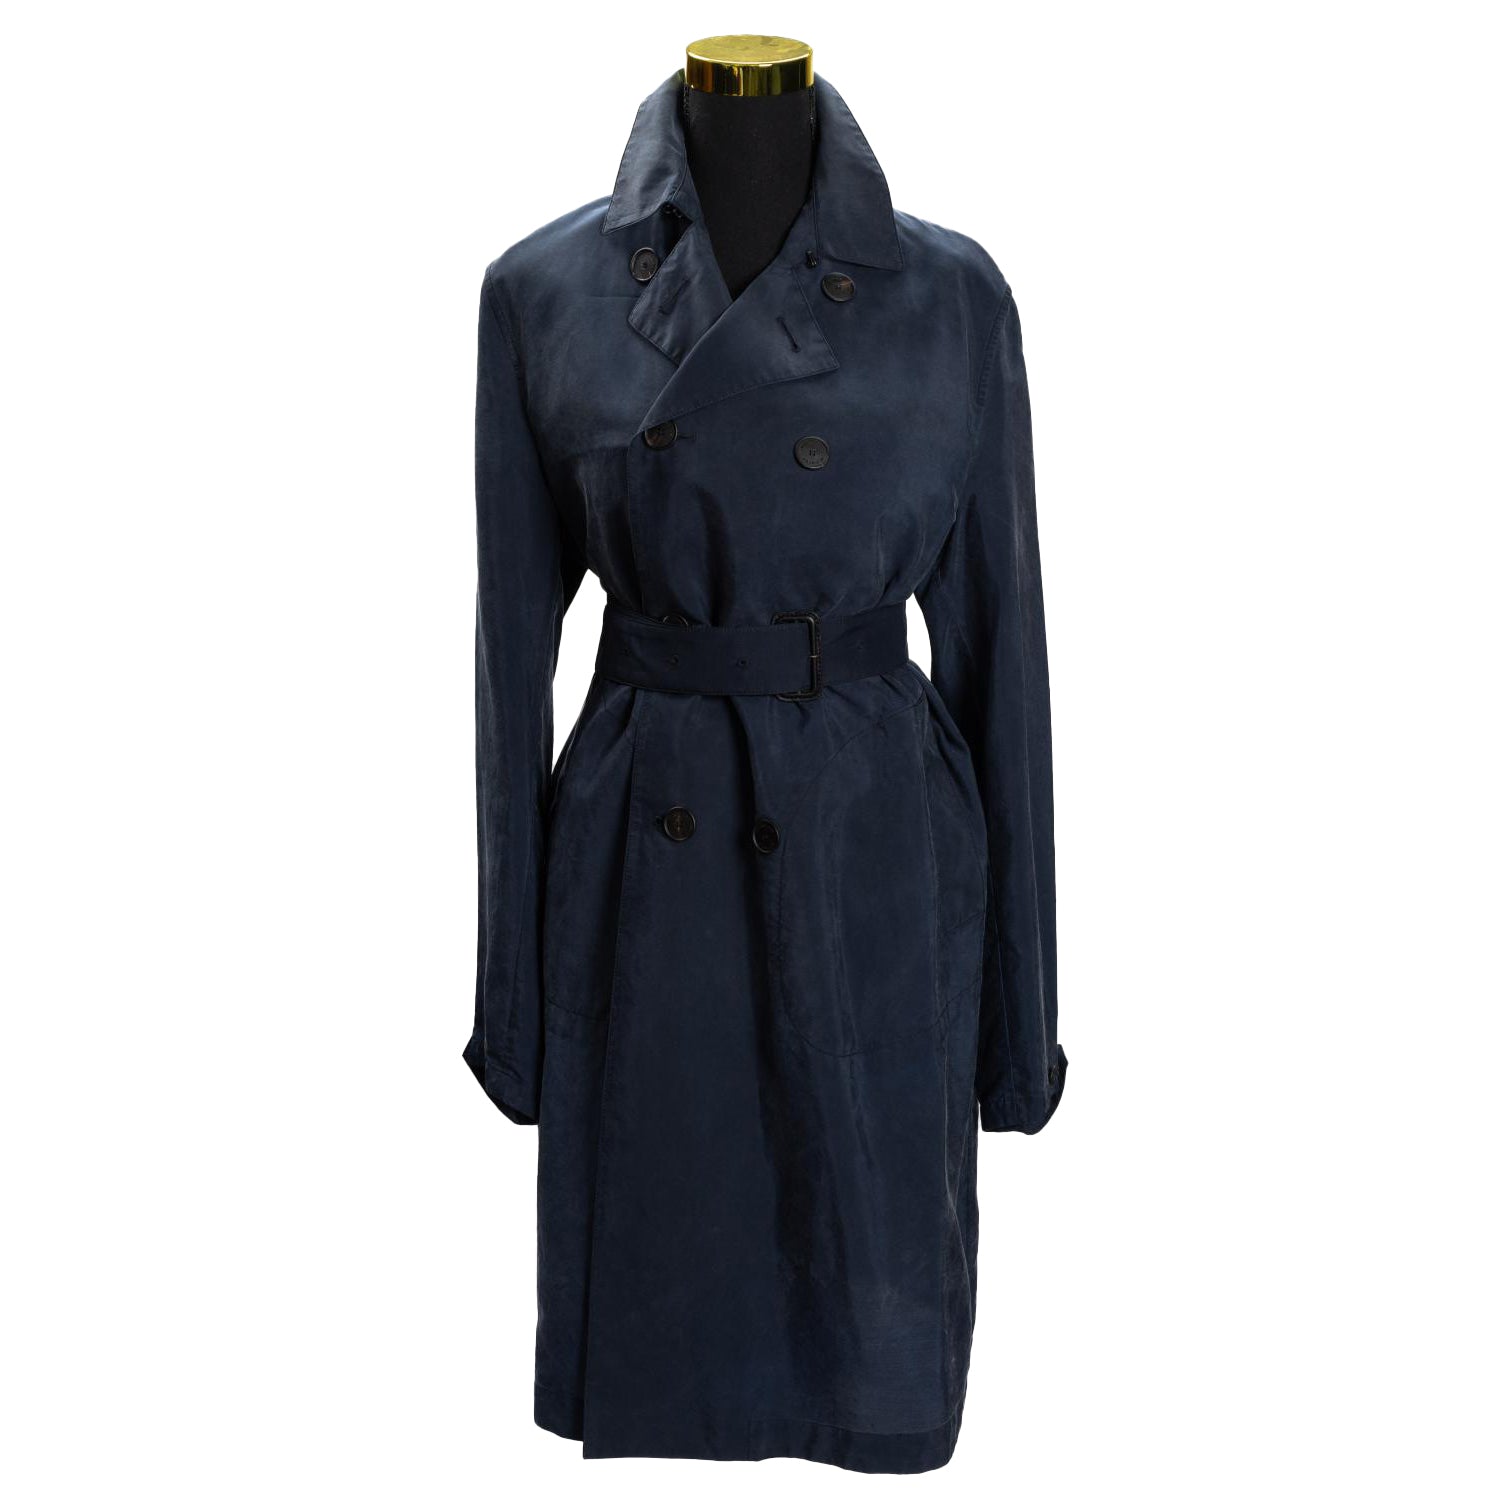 Burberry Navy Trench Coat with Belt- SIze 44